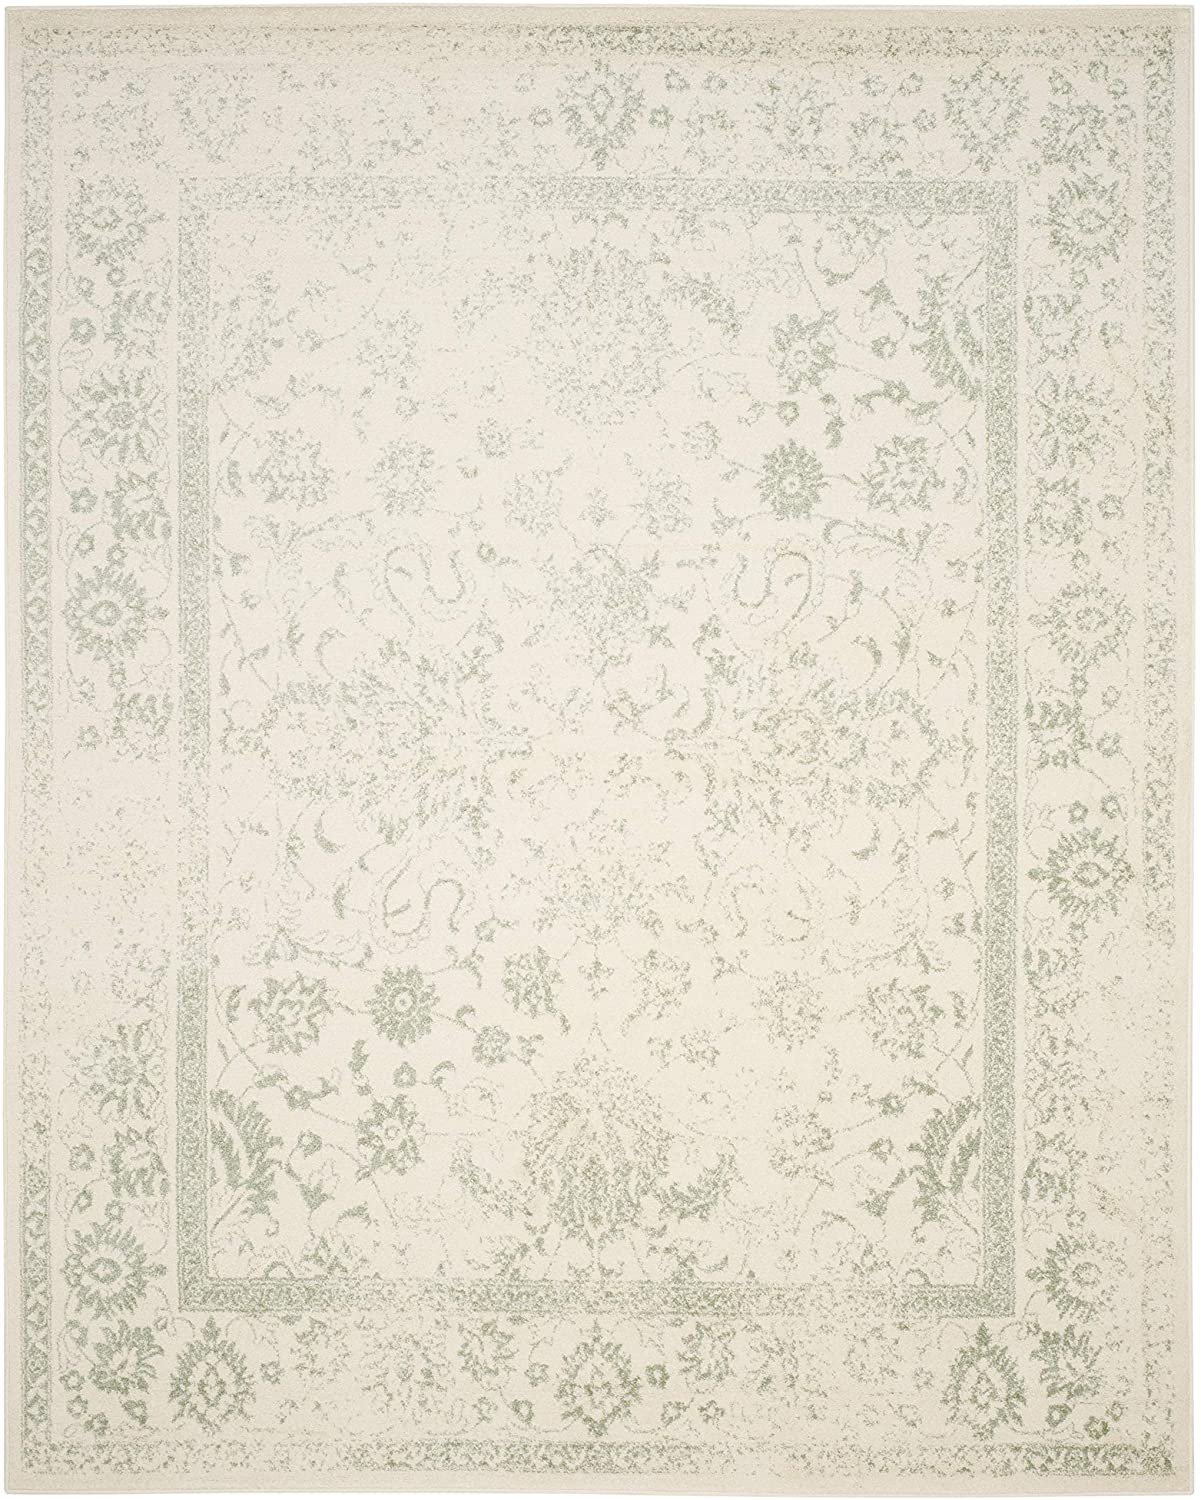 Safavieh Adirondack Collection ADR109V Oriental Distressed Non-Shedding Stain Resistant Living Room Bedroom Runner, 2'1" x 6' , Ivory / Sage